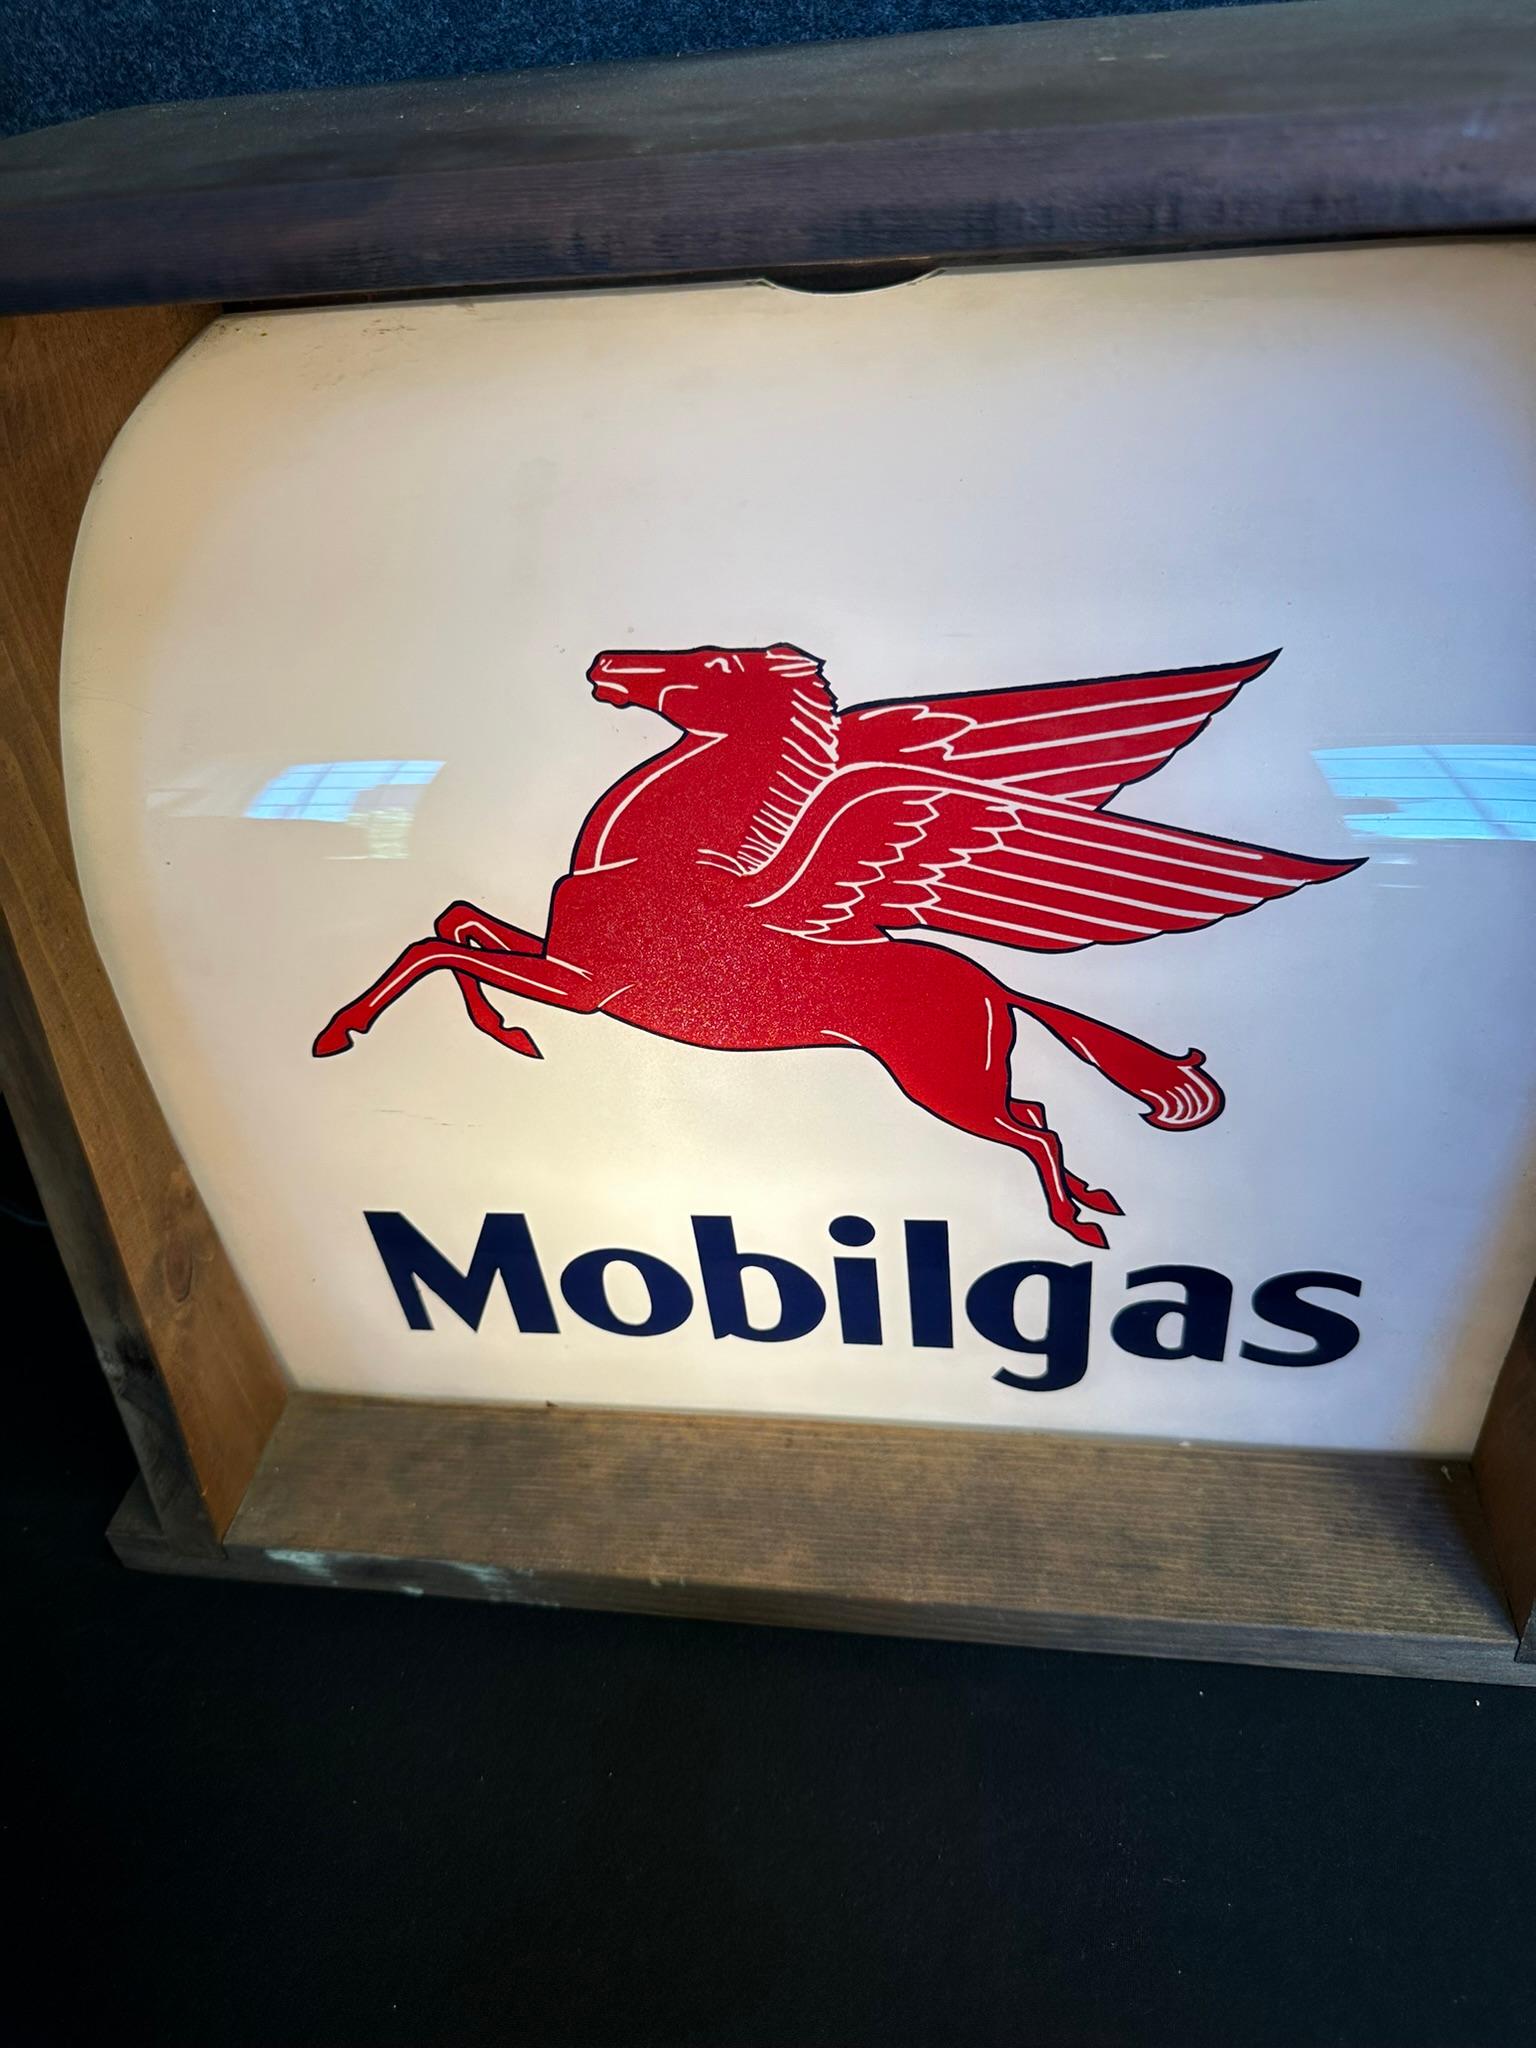 Mobilgas Mobil Oil National A38 Gas Pump Lense w/ Lighted Cabinet